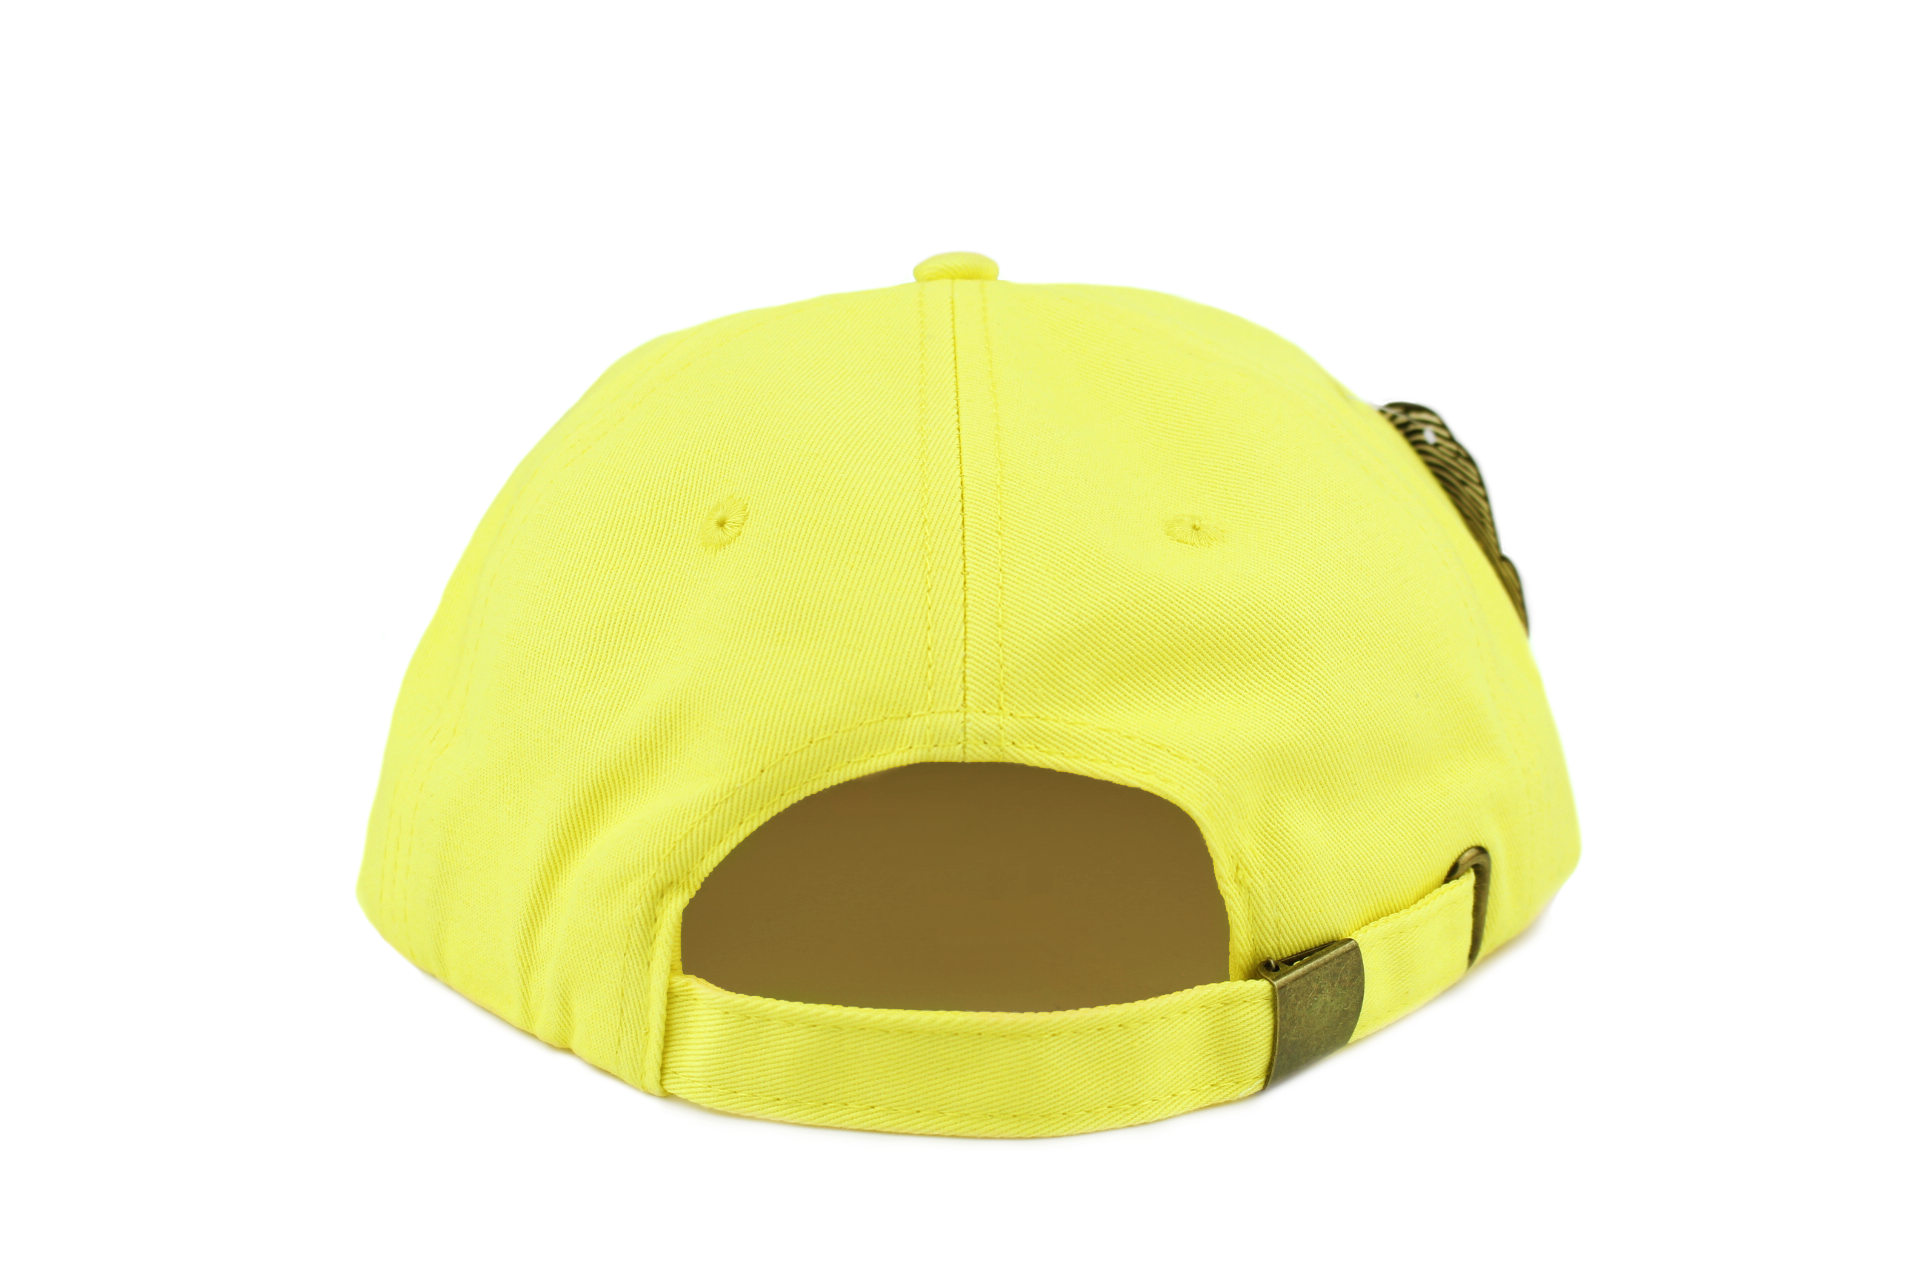 The Easy - 100% Cotton - Bright Yellow